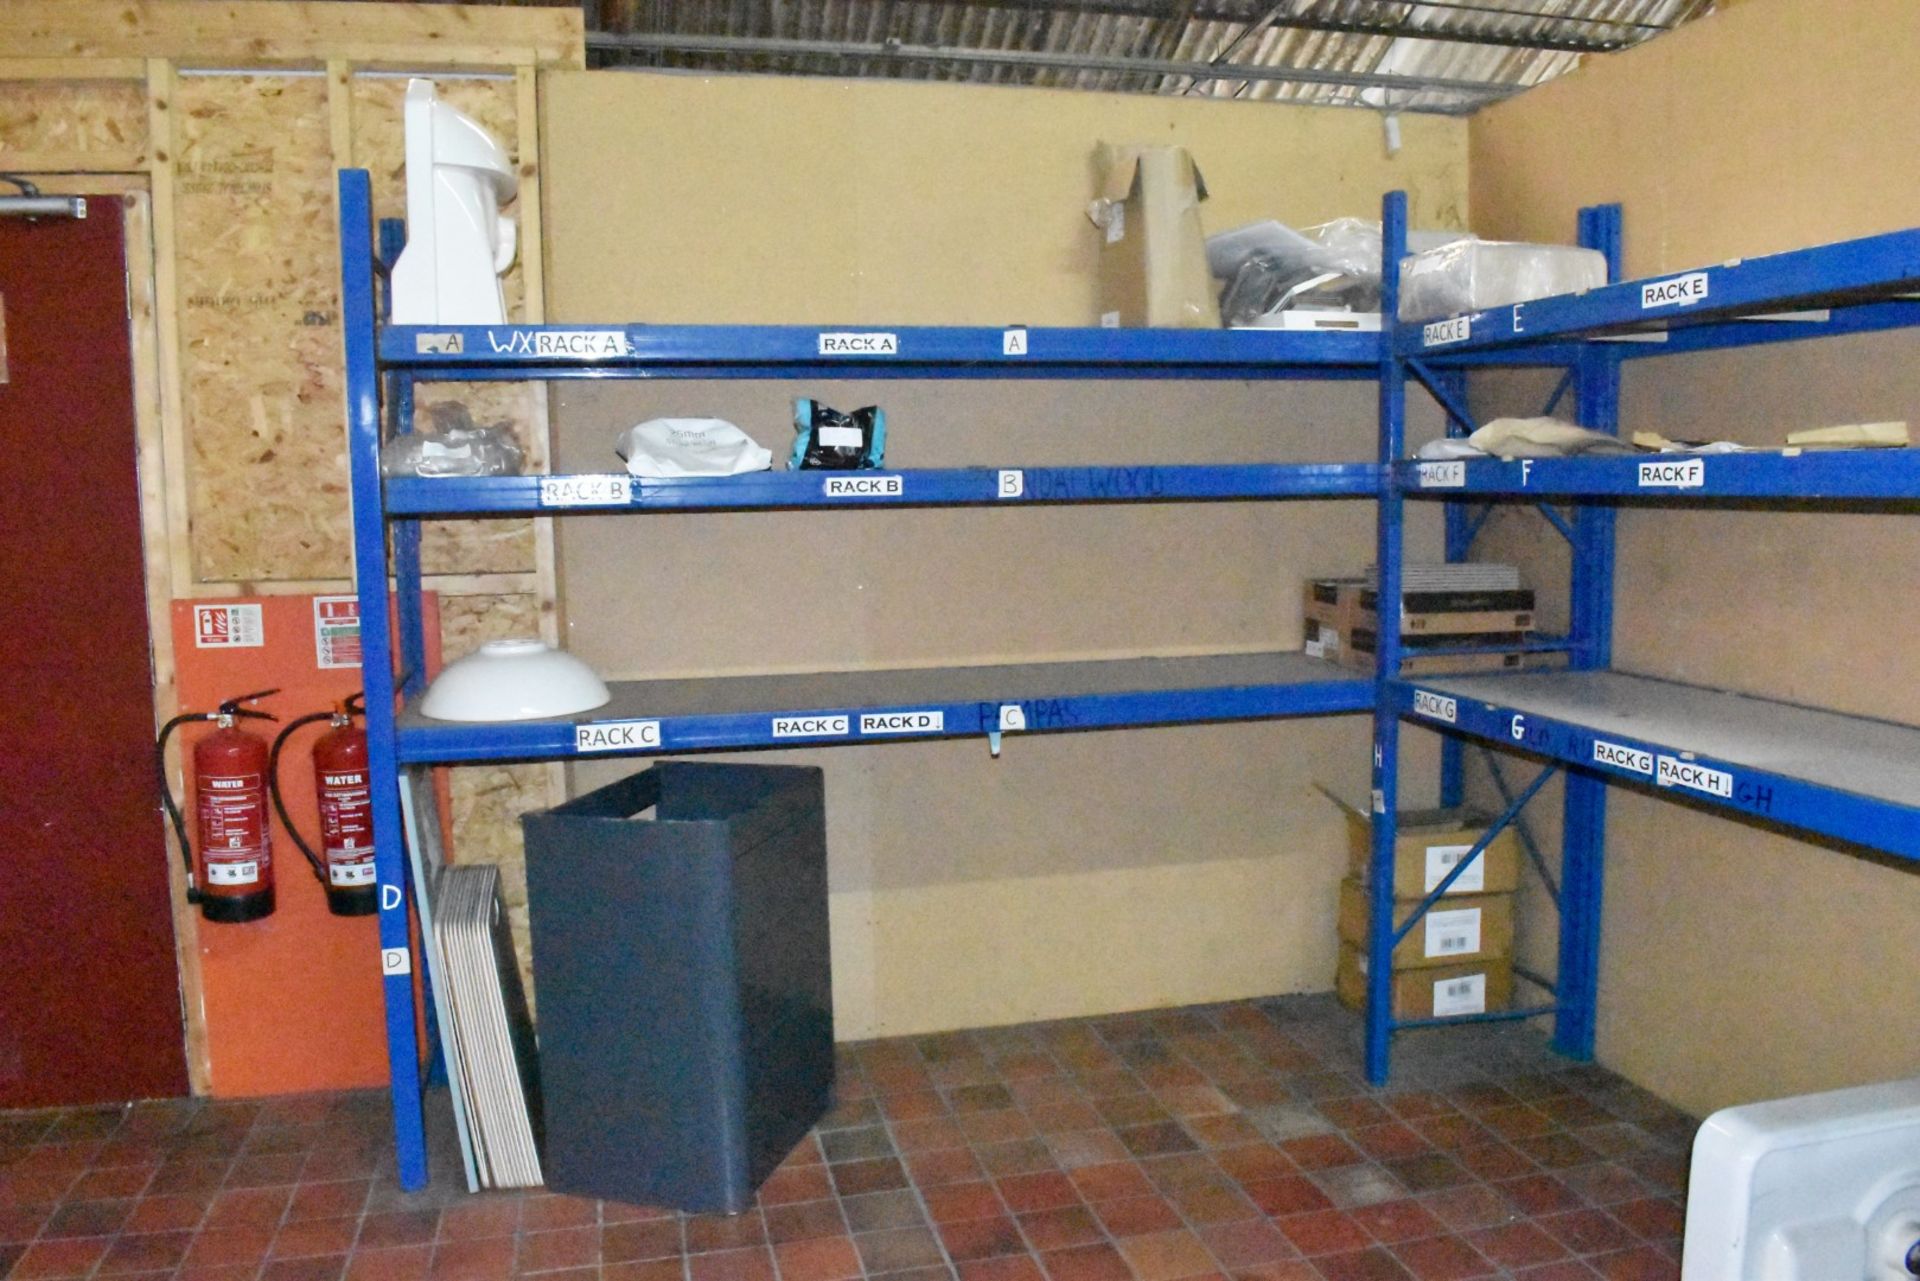 1 x Large Collection of Warehouse Shelving to Include 7 x Uprights, 34 x Crossbeams and Shelves - Image 10 of 13